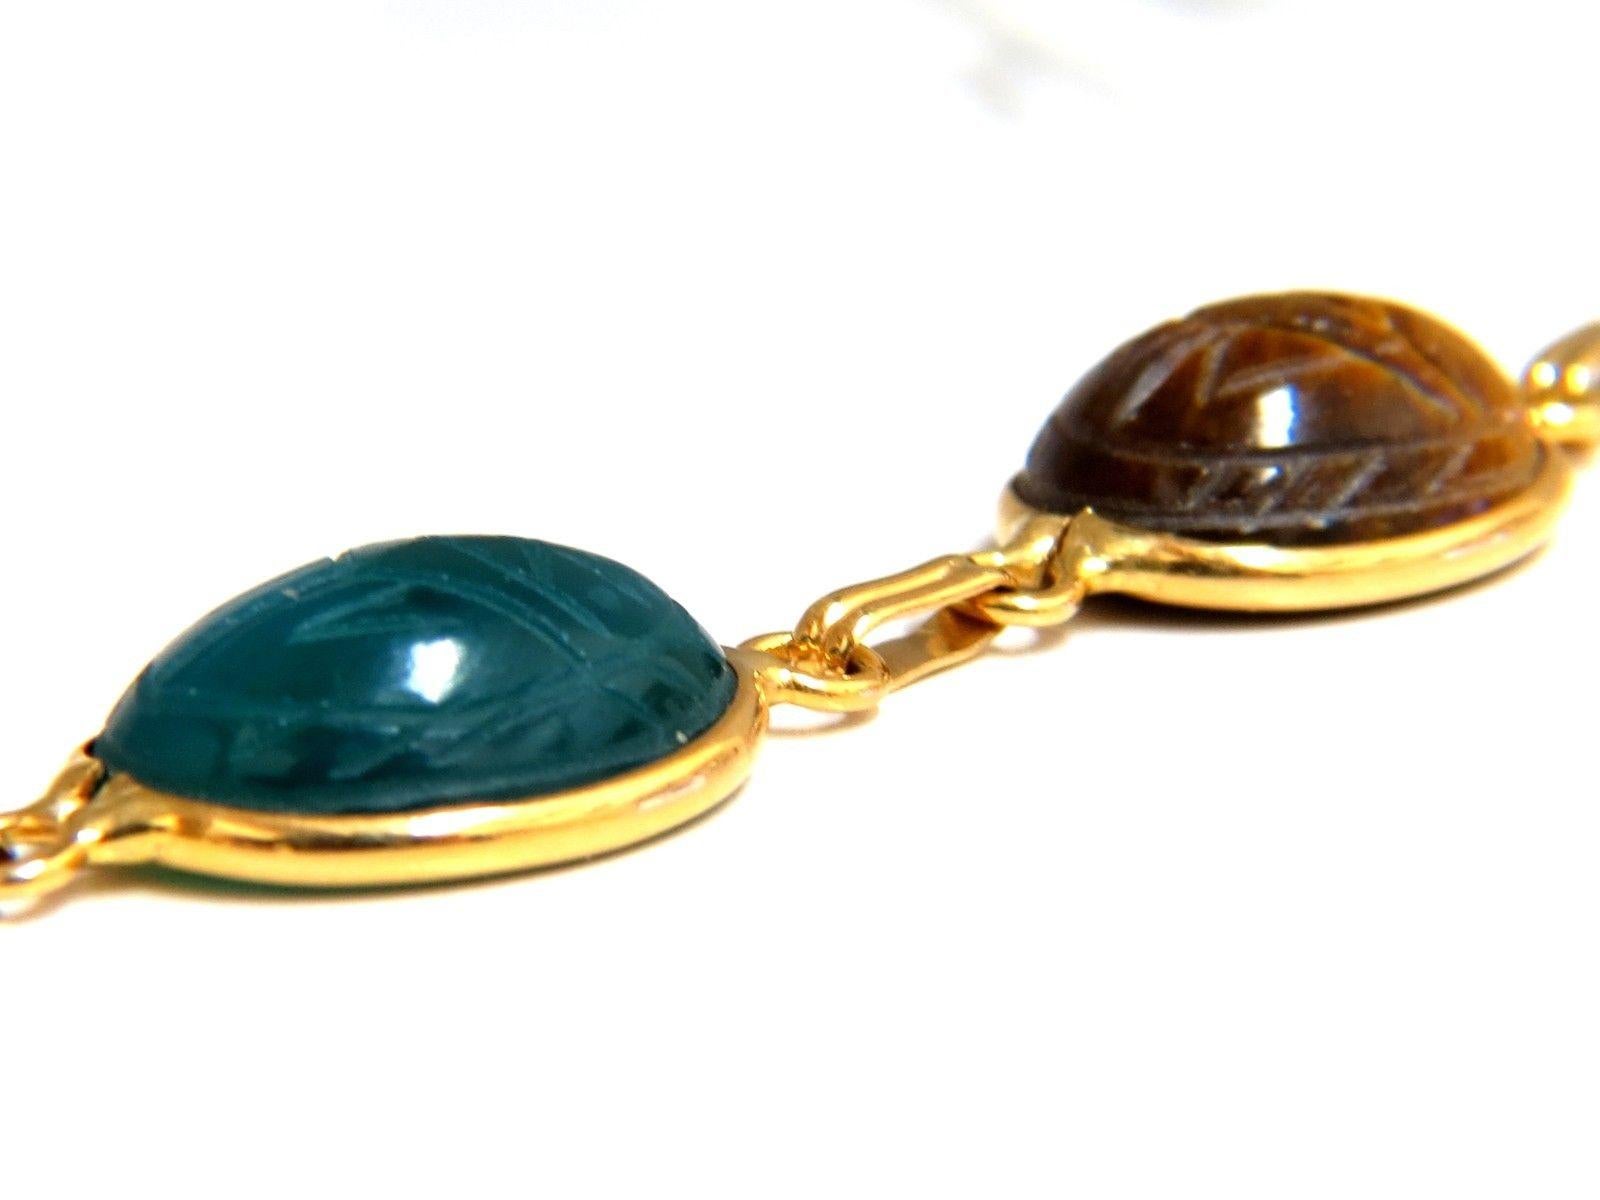 Classic Cabochon Scarab Bracelet

Secure pressure clasp 

14 grams.

14kt. Yellow gold. 

Measures 8 inches (wearable length)

Each stone: 12 x 15mm